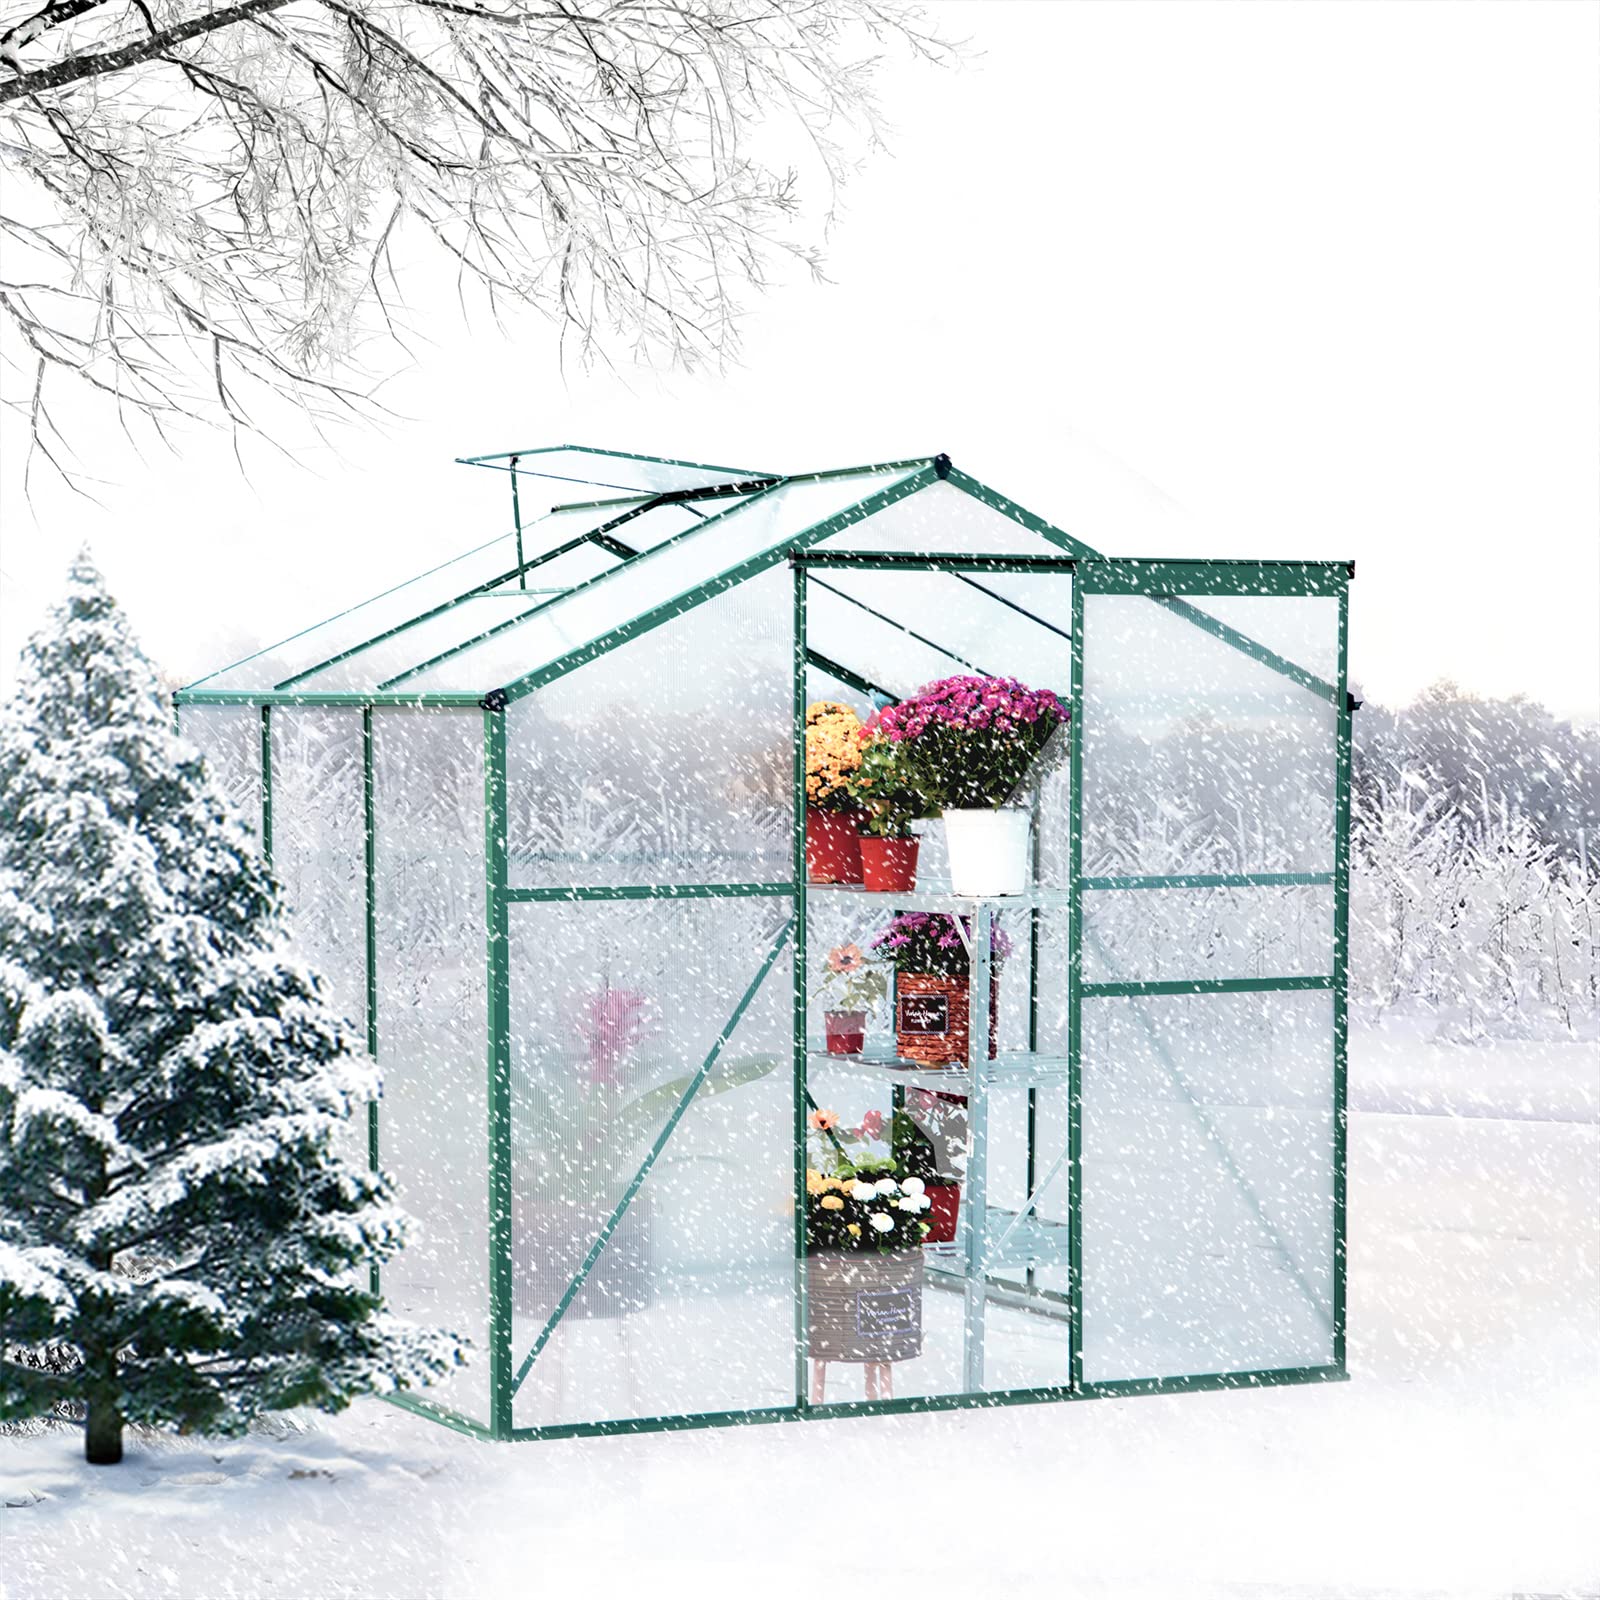 Building a Winter-Resistant Greenhouse: Tips for a Thriving Garden in Cold Months